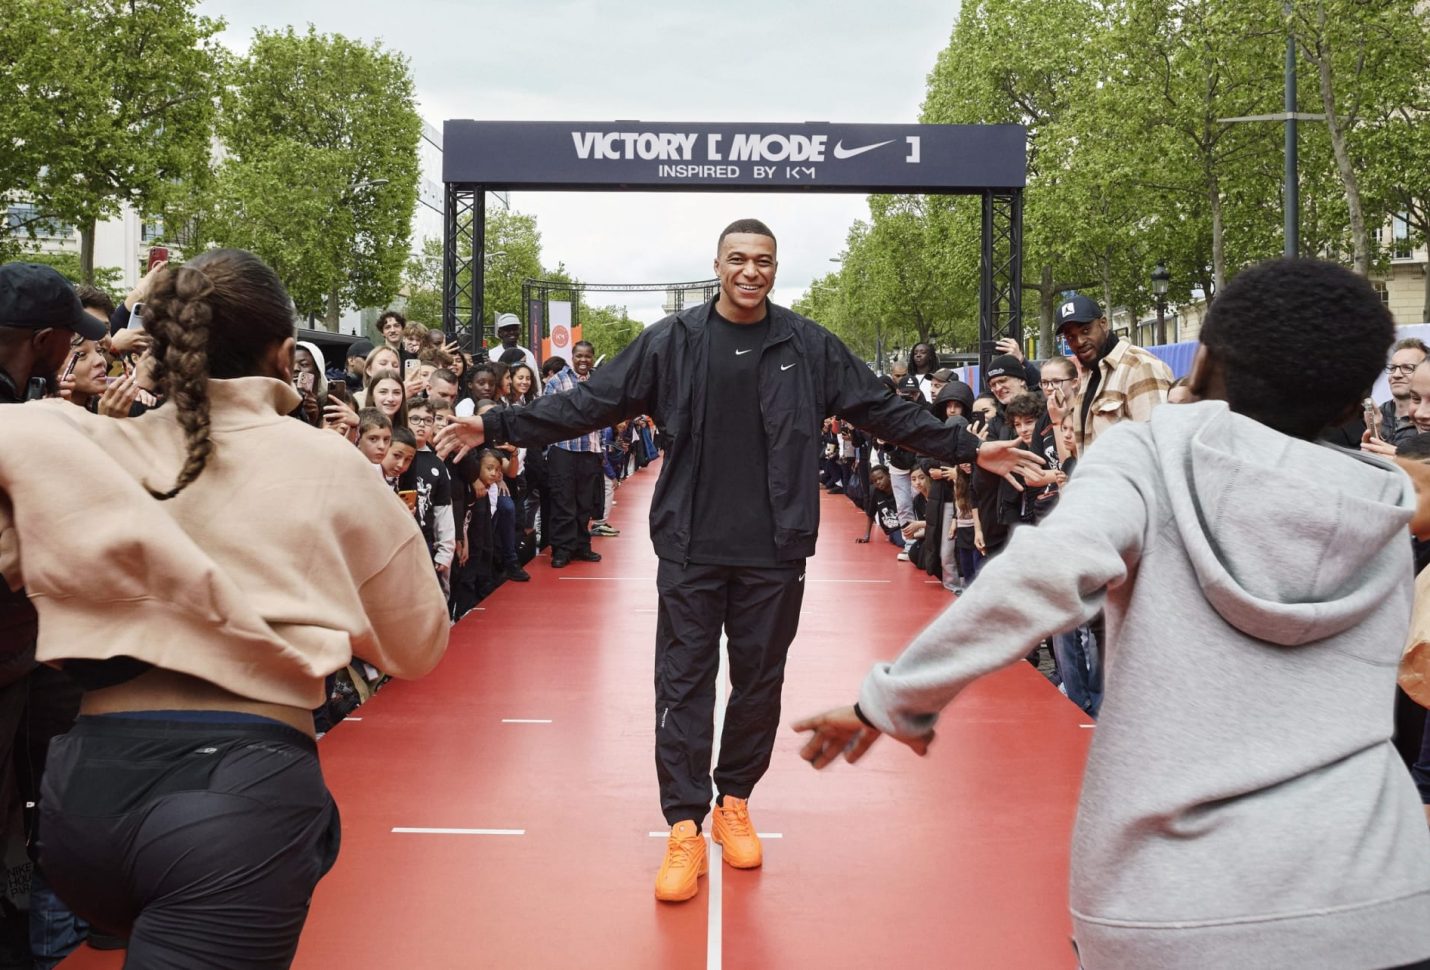 Nike’s “Victory Mode” tour encourages youths to discover new sports